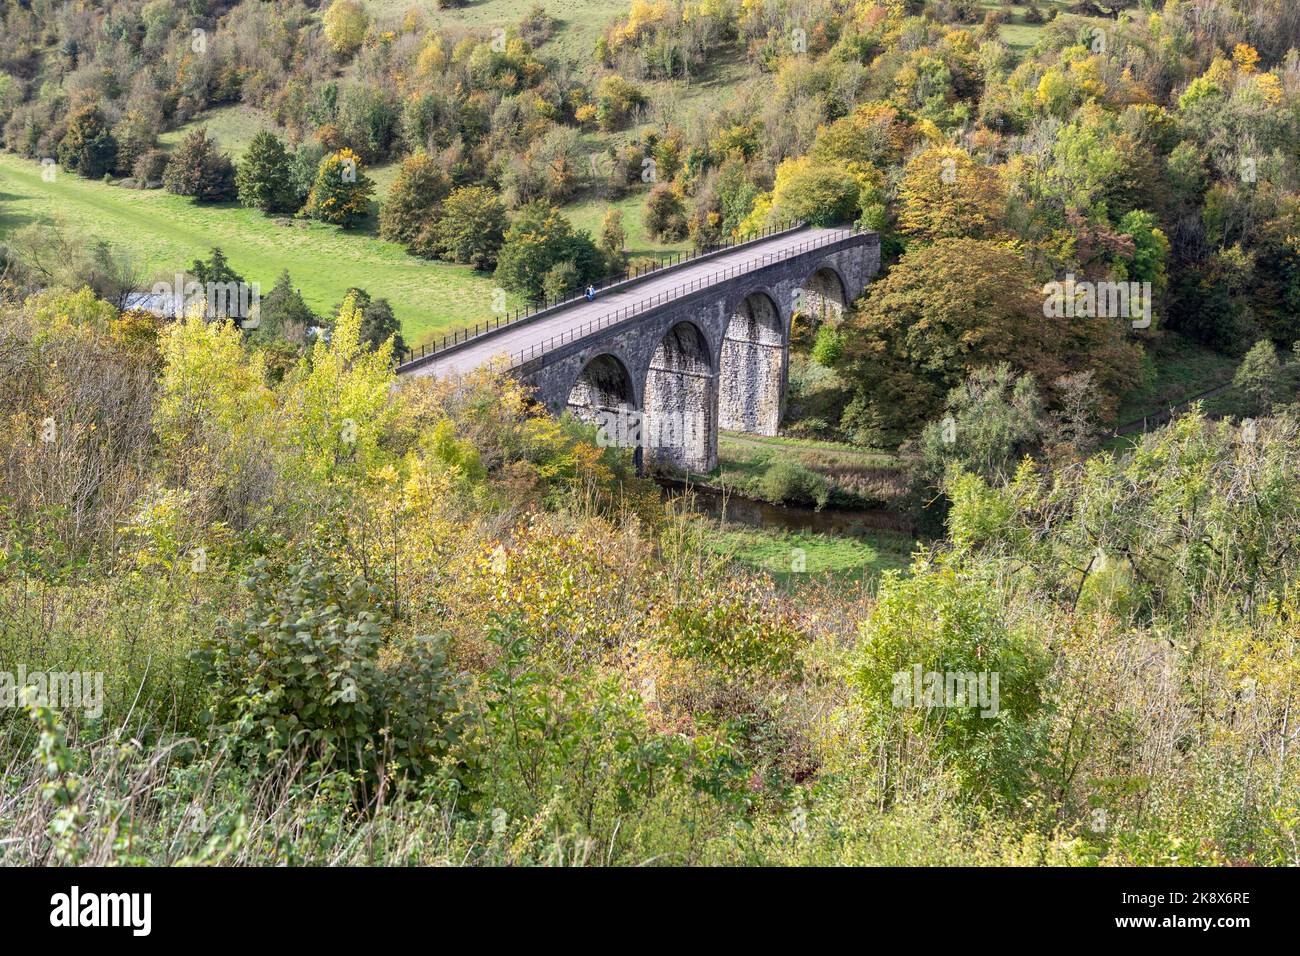 The Headstone Viaduct, Monsal Dale was built by the Midland Railway over the River Wye Stock Photo